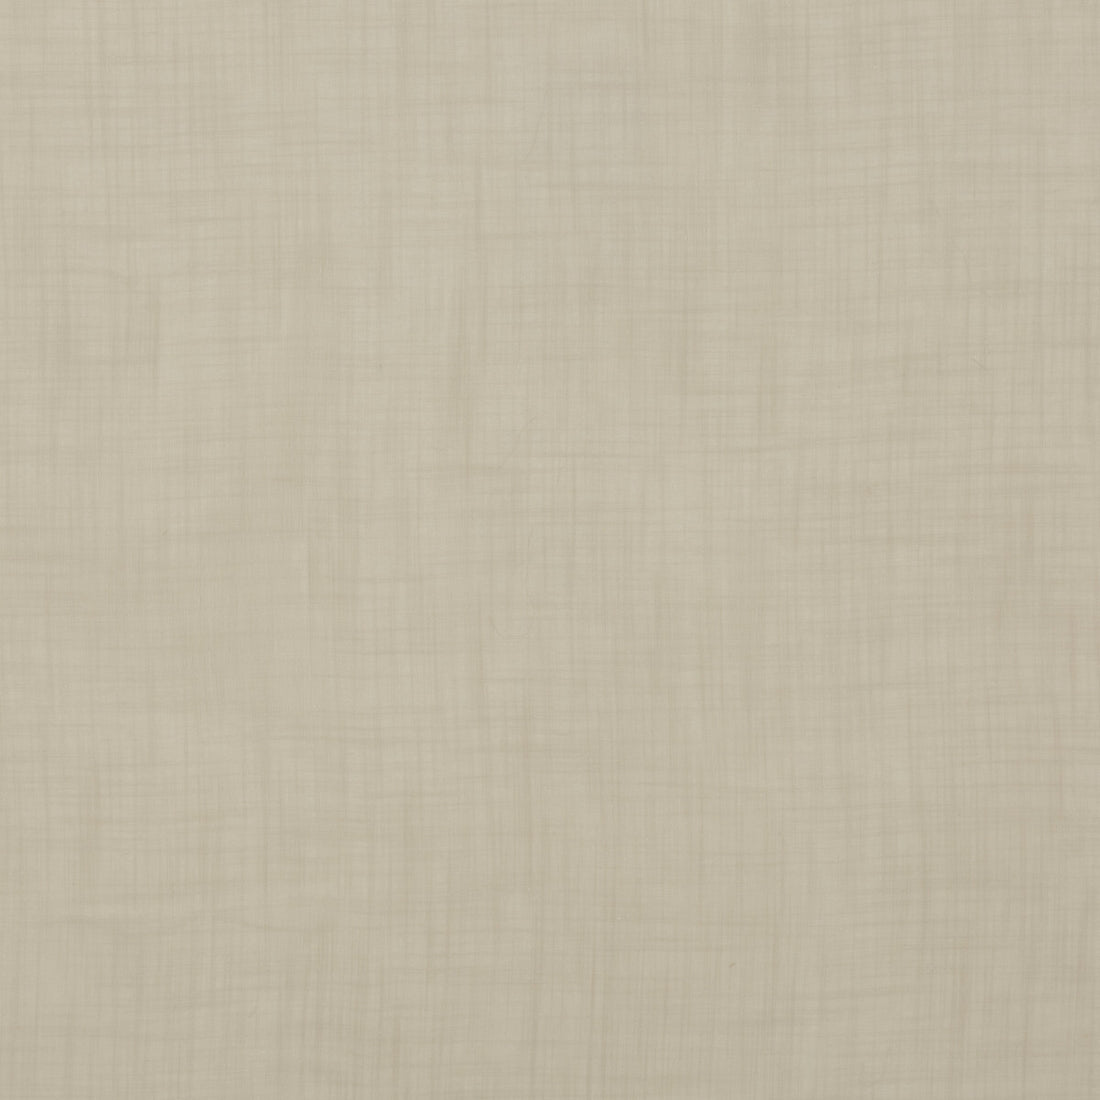 Kelso fabric in parchment color - pattern PV1005.225.0 - by Baker Lifestyle in the Notebooks collection